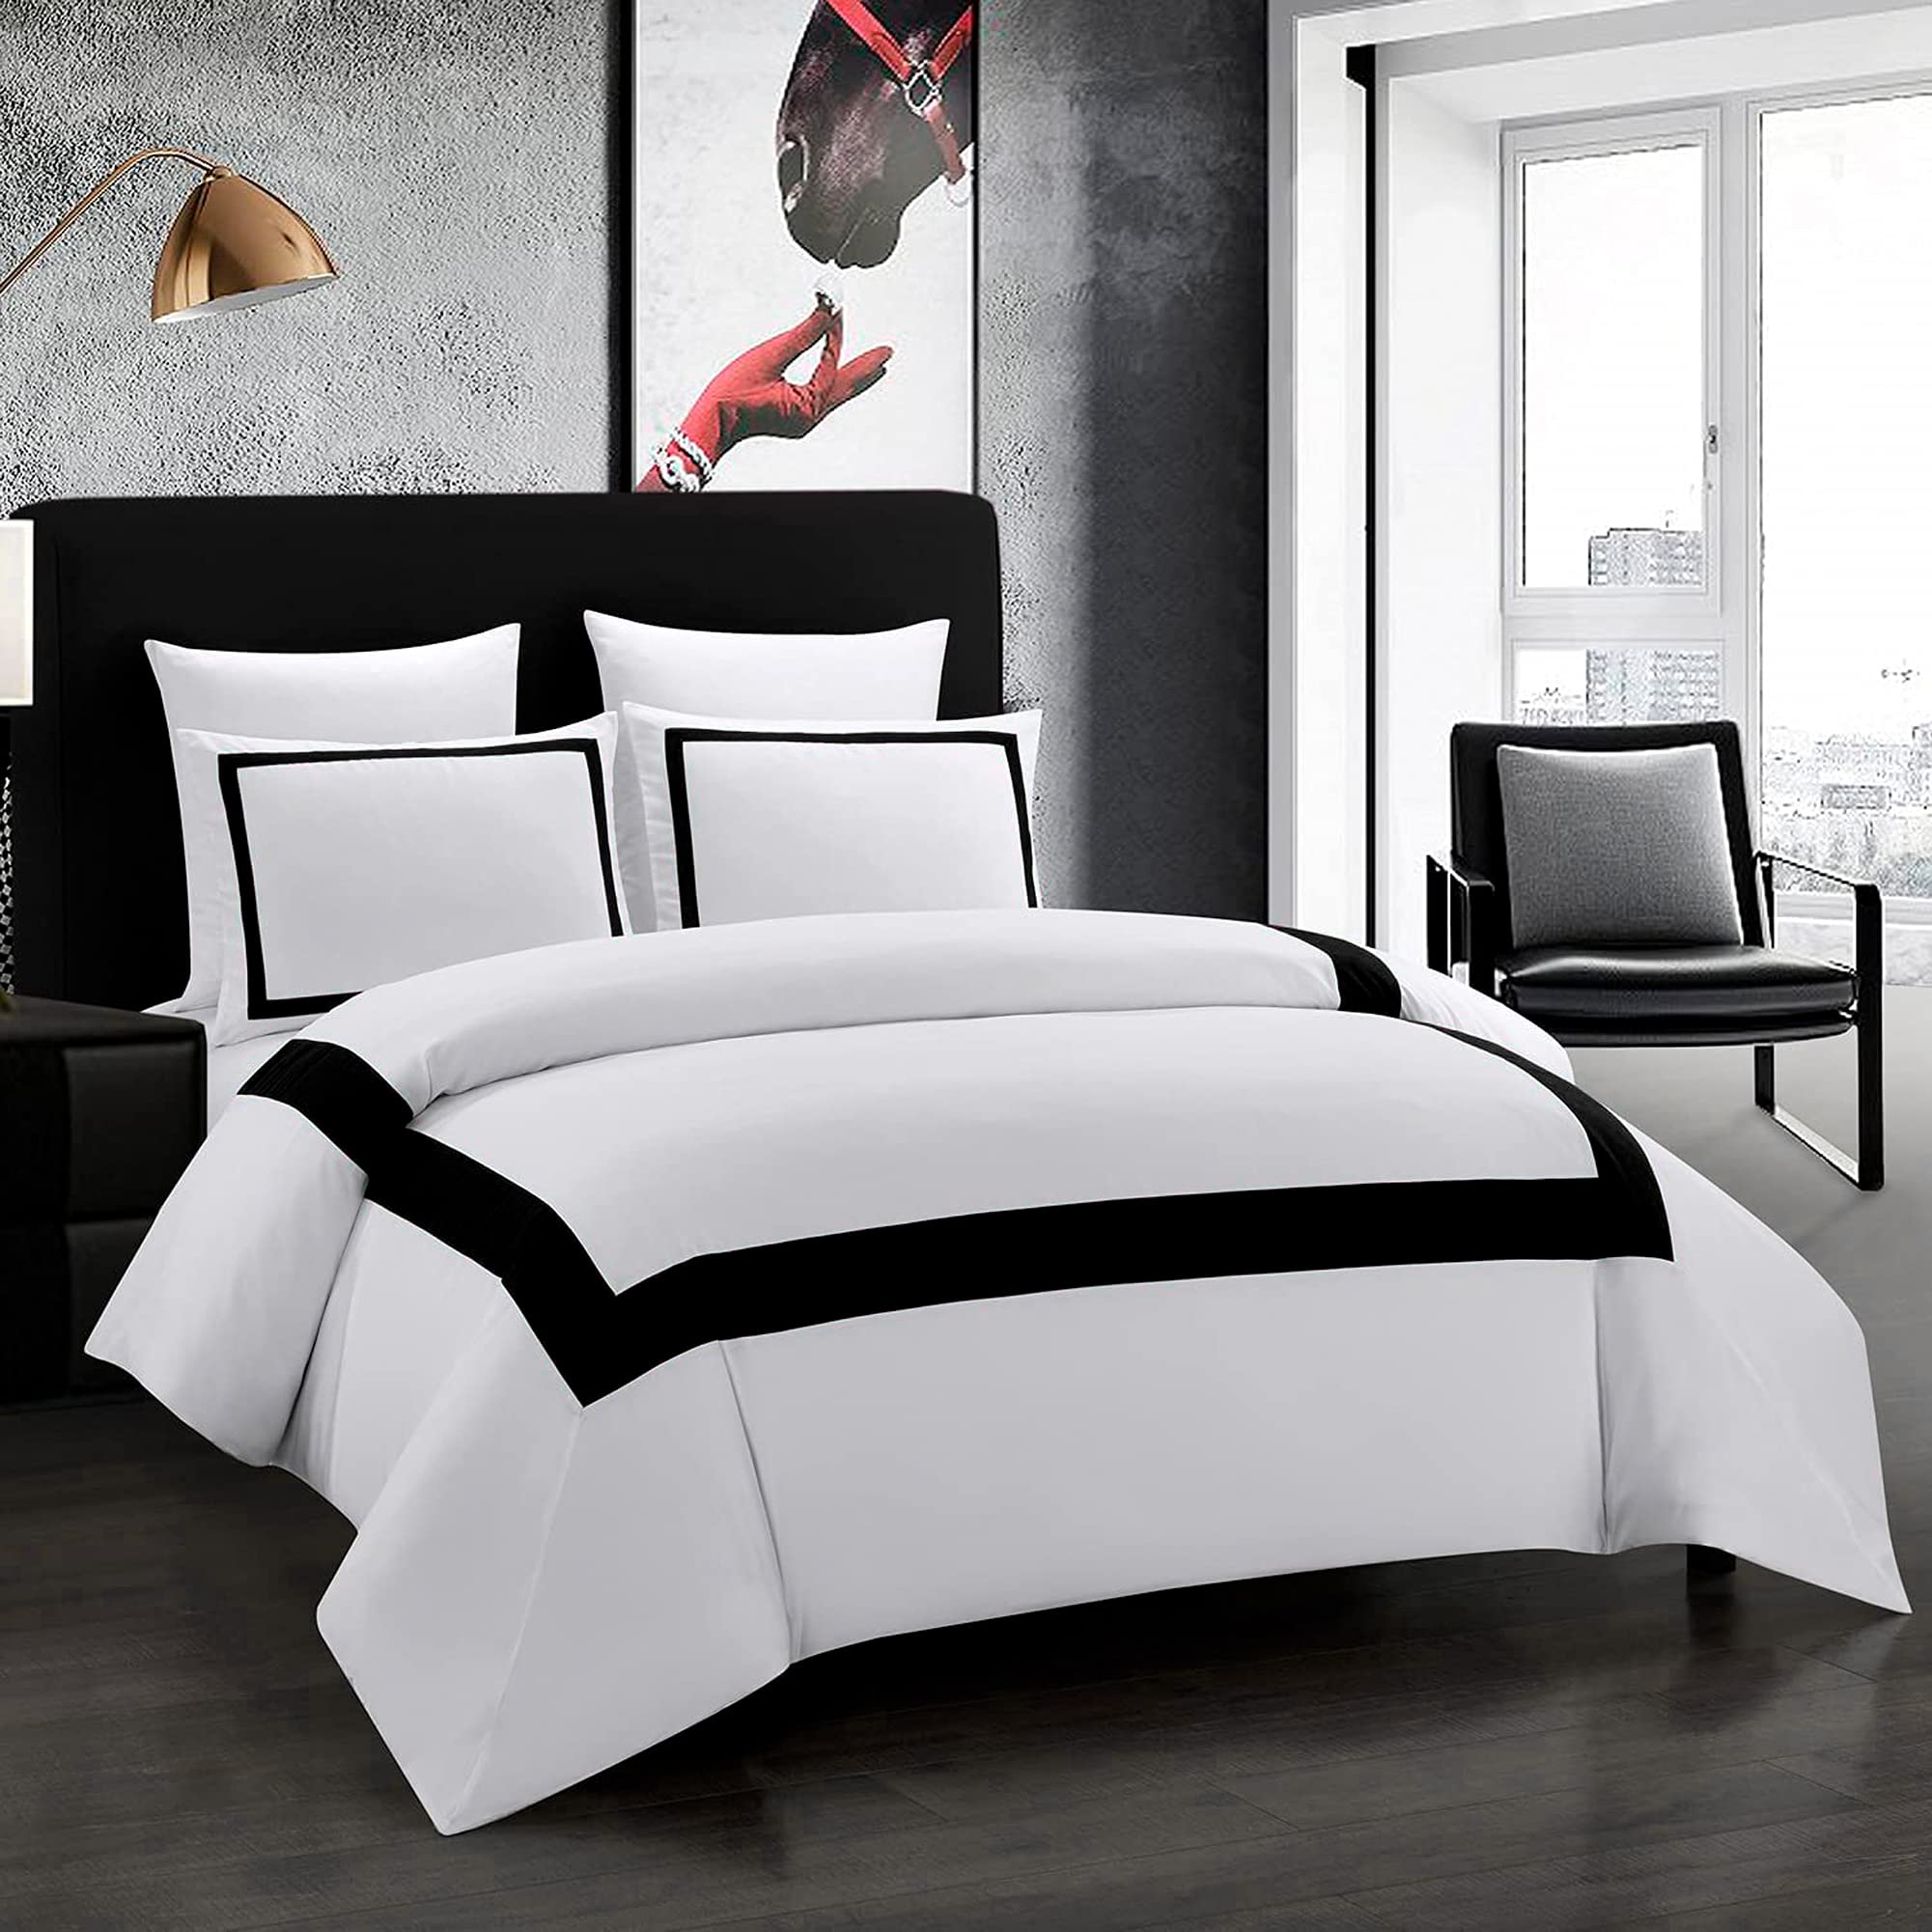 OSVINO Hotel Duvet Cover Set Twin Size 2Pcs Microfiber Black Line Pattern Bedding Collection Ultra Soft Breathable Duvet Cover w